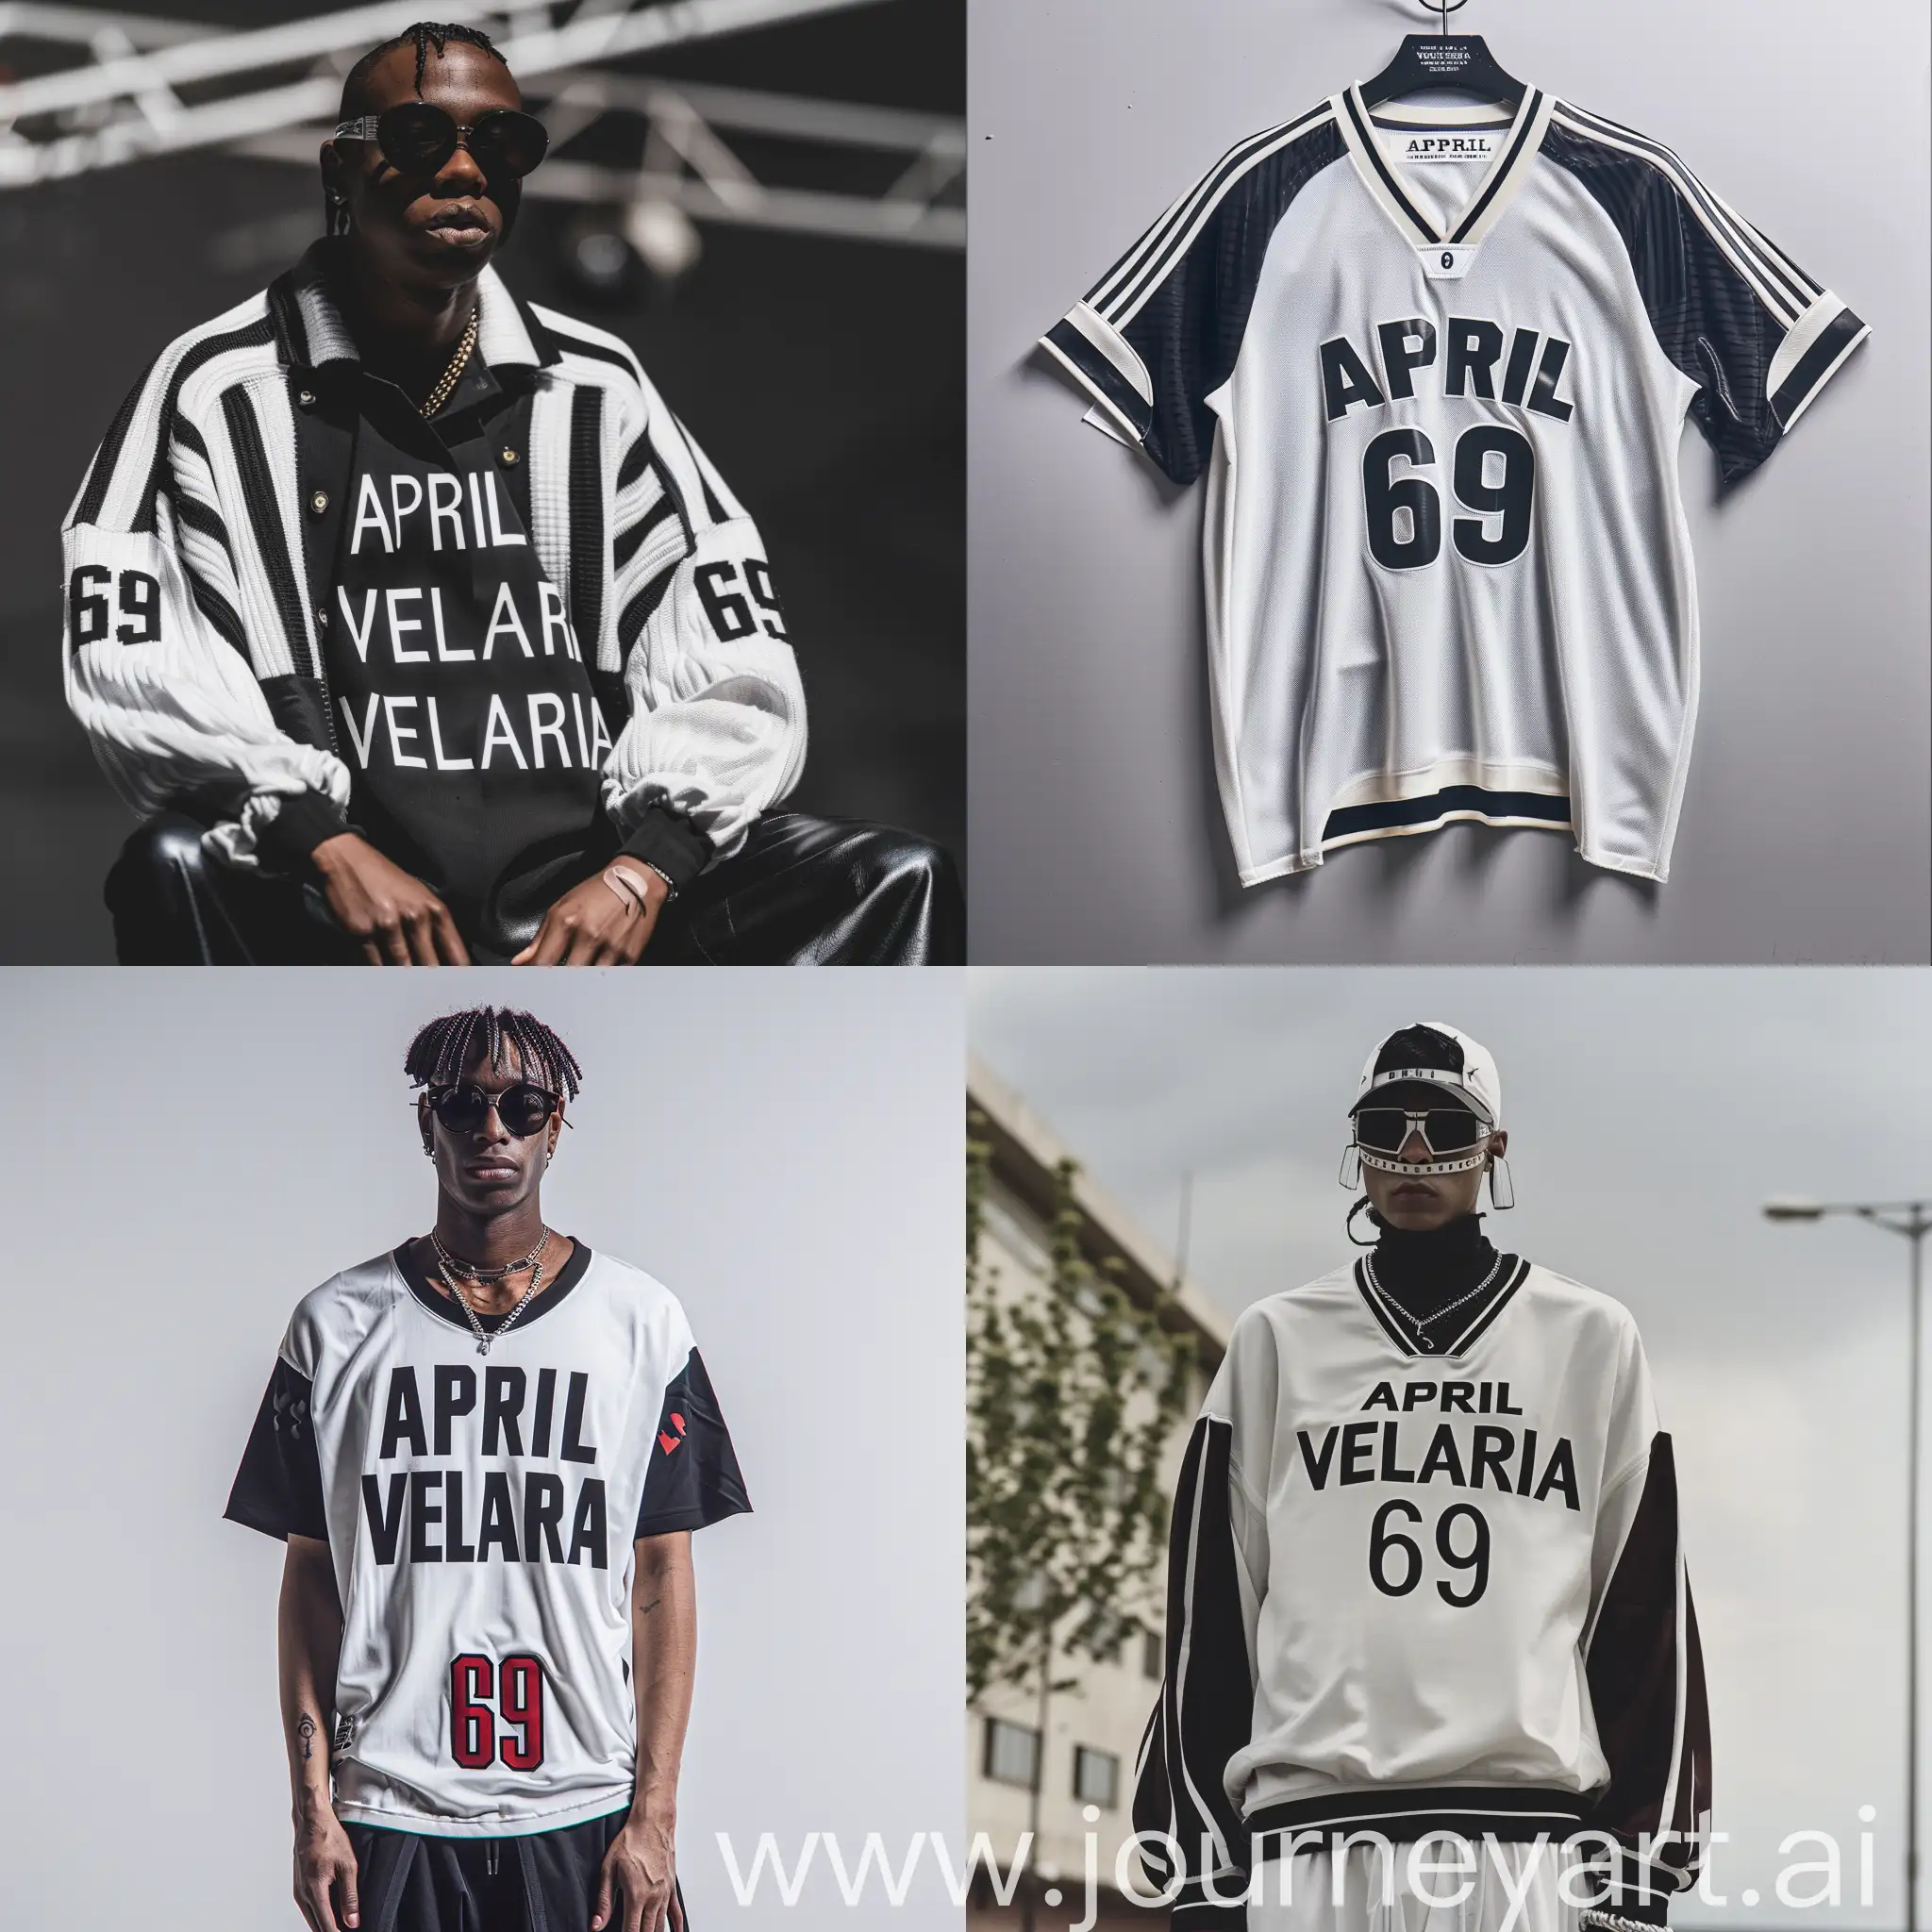 High-Fashion-Unique-WhiteBlack-Jersey-Inspired-by-Maison-Margiela-APRIL-VELARIA-Edition-with-Player-Number-69